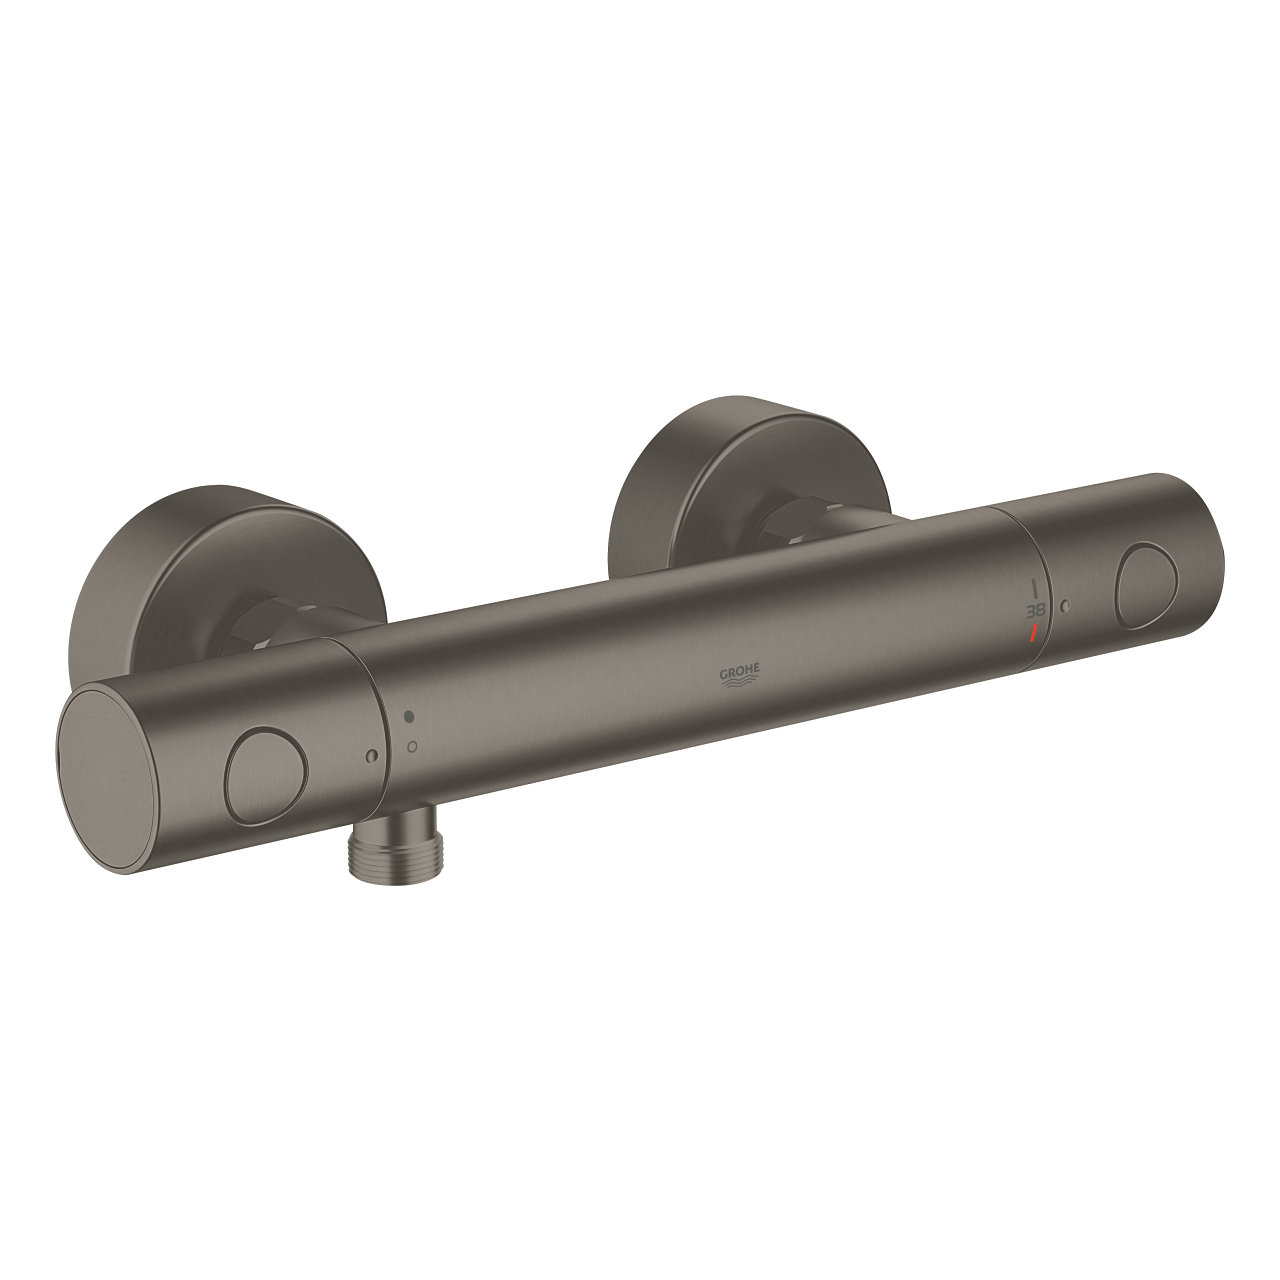 Baterie dus termostatata Grohe Grohtherm 1000 Cosmopolitan M brushed hard graphite 1000